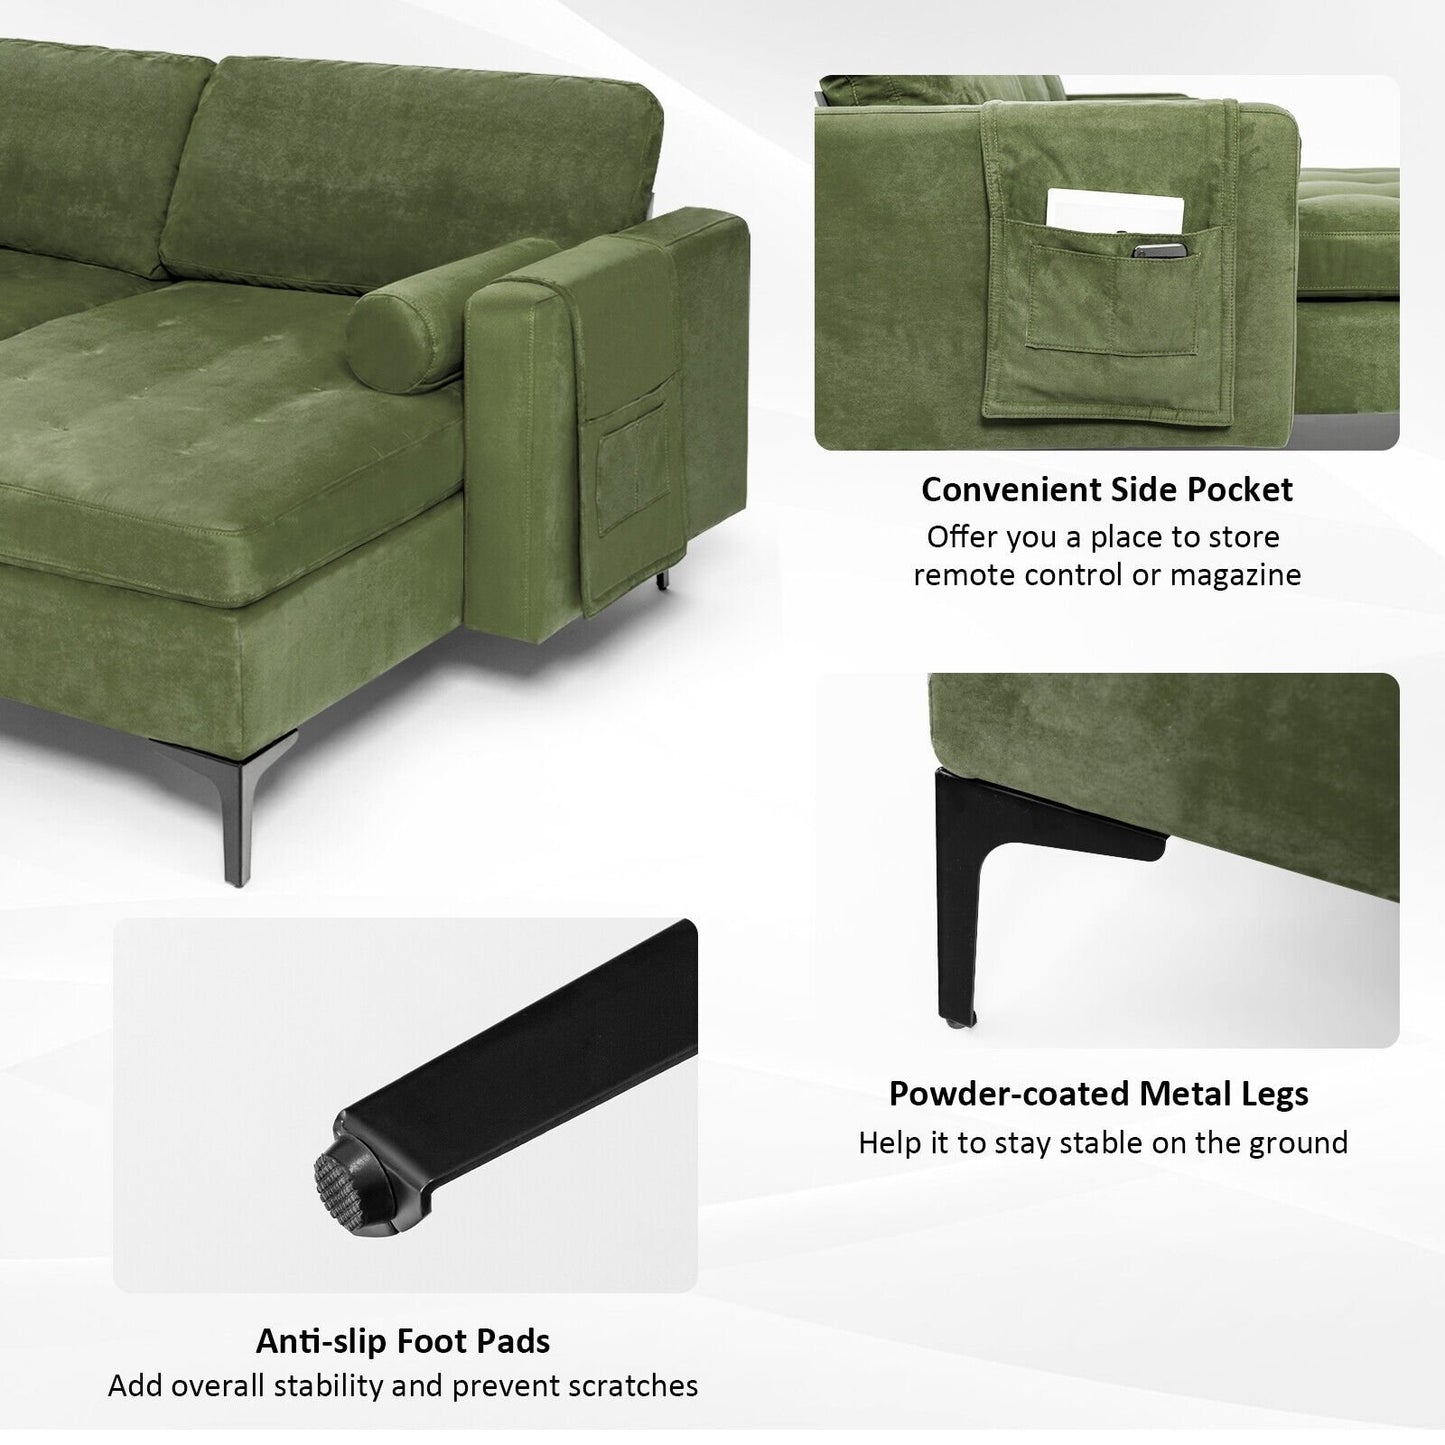 Modular 2-seat/3-Seat/4-Seat L-shaped Sectional Sofa Couch with Reversible Chaise and Socket USB Ports-3-Seat L-shaped, Army Green